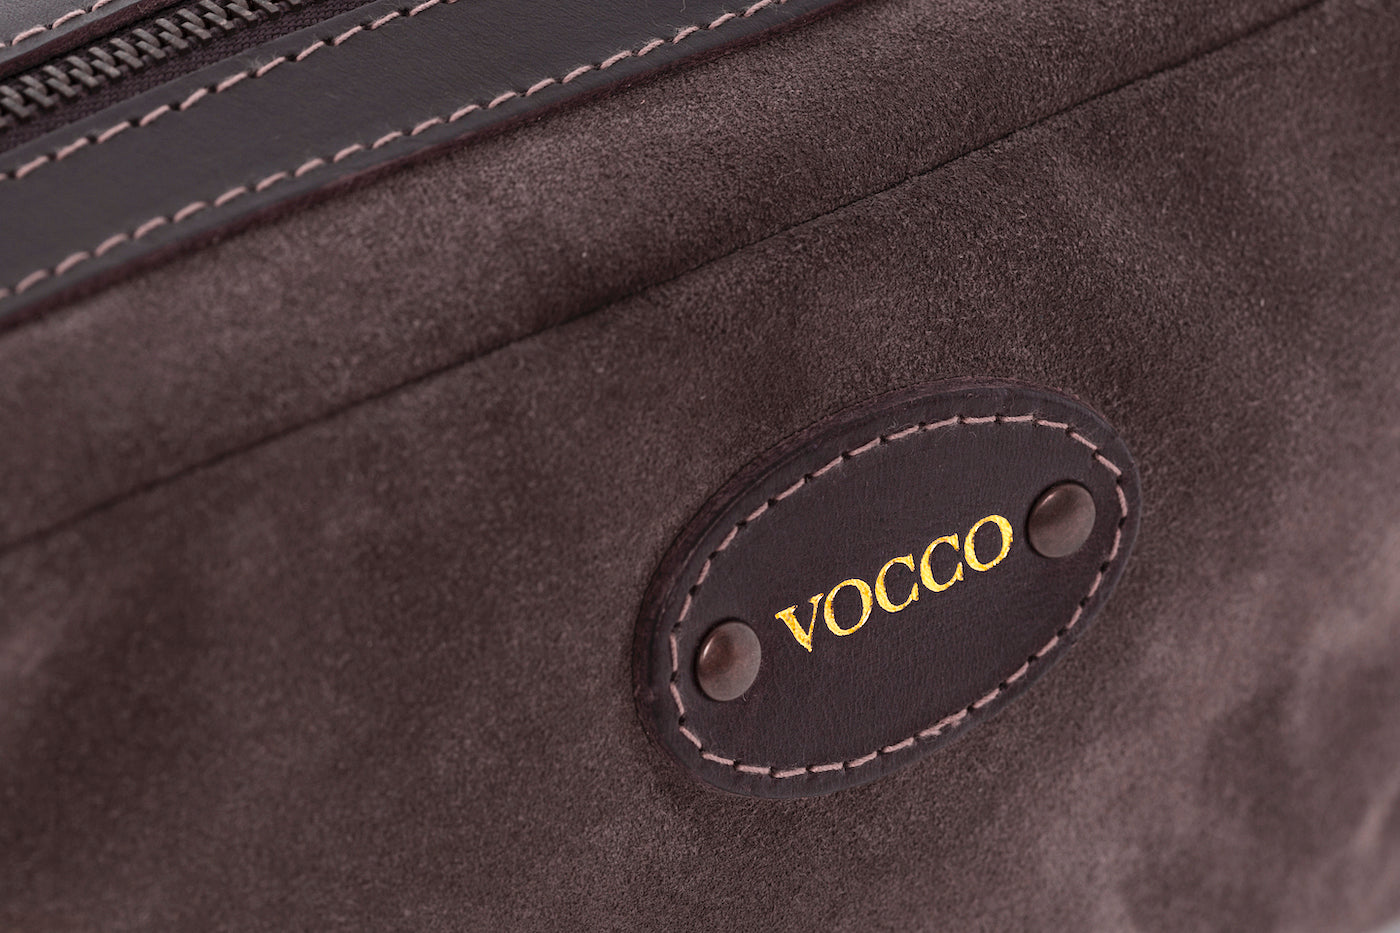 Vocco  Leather Taupe Toiletry Case - Vocco